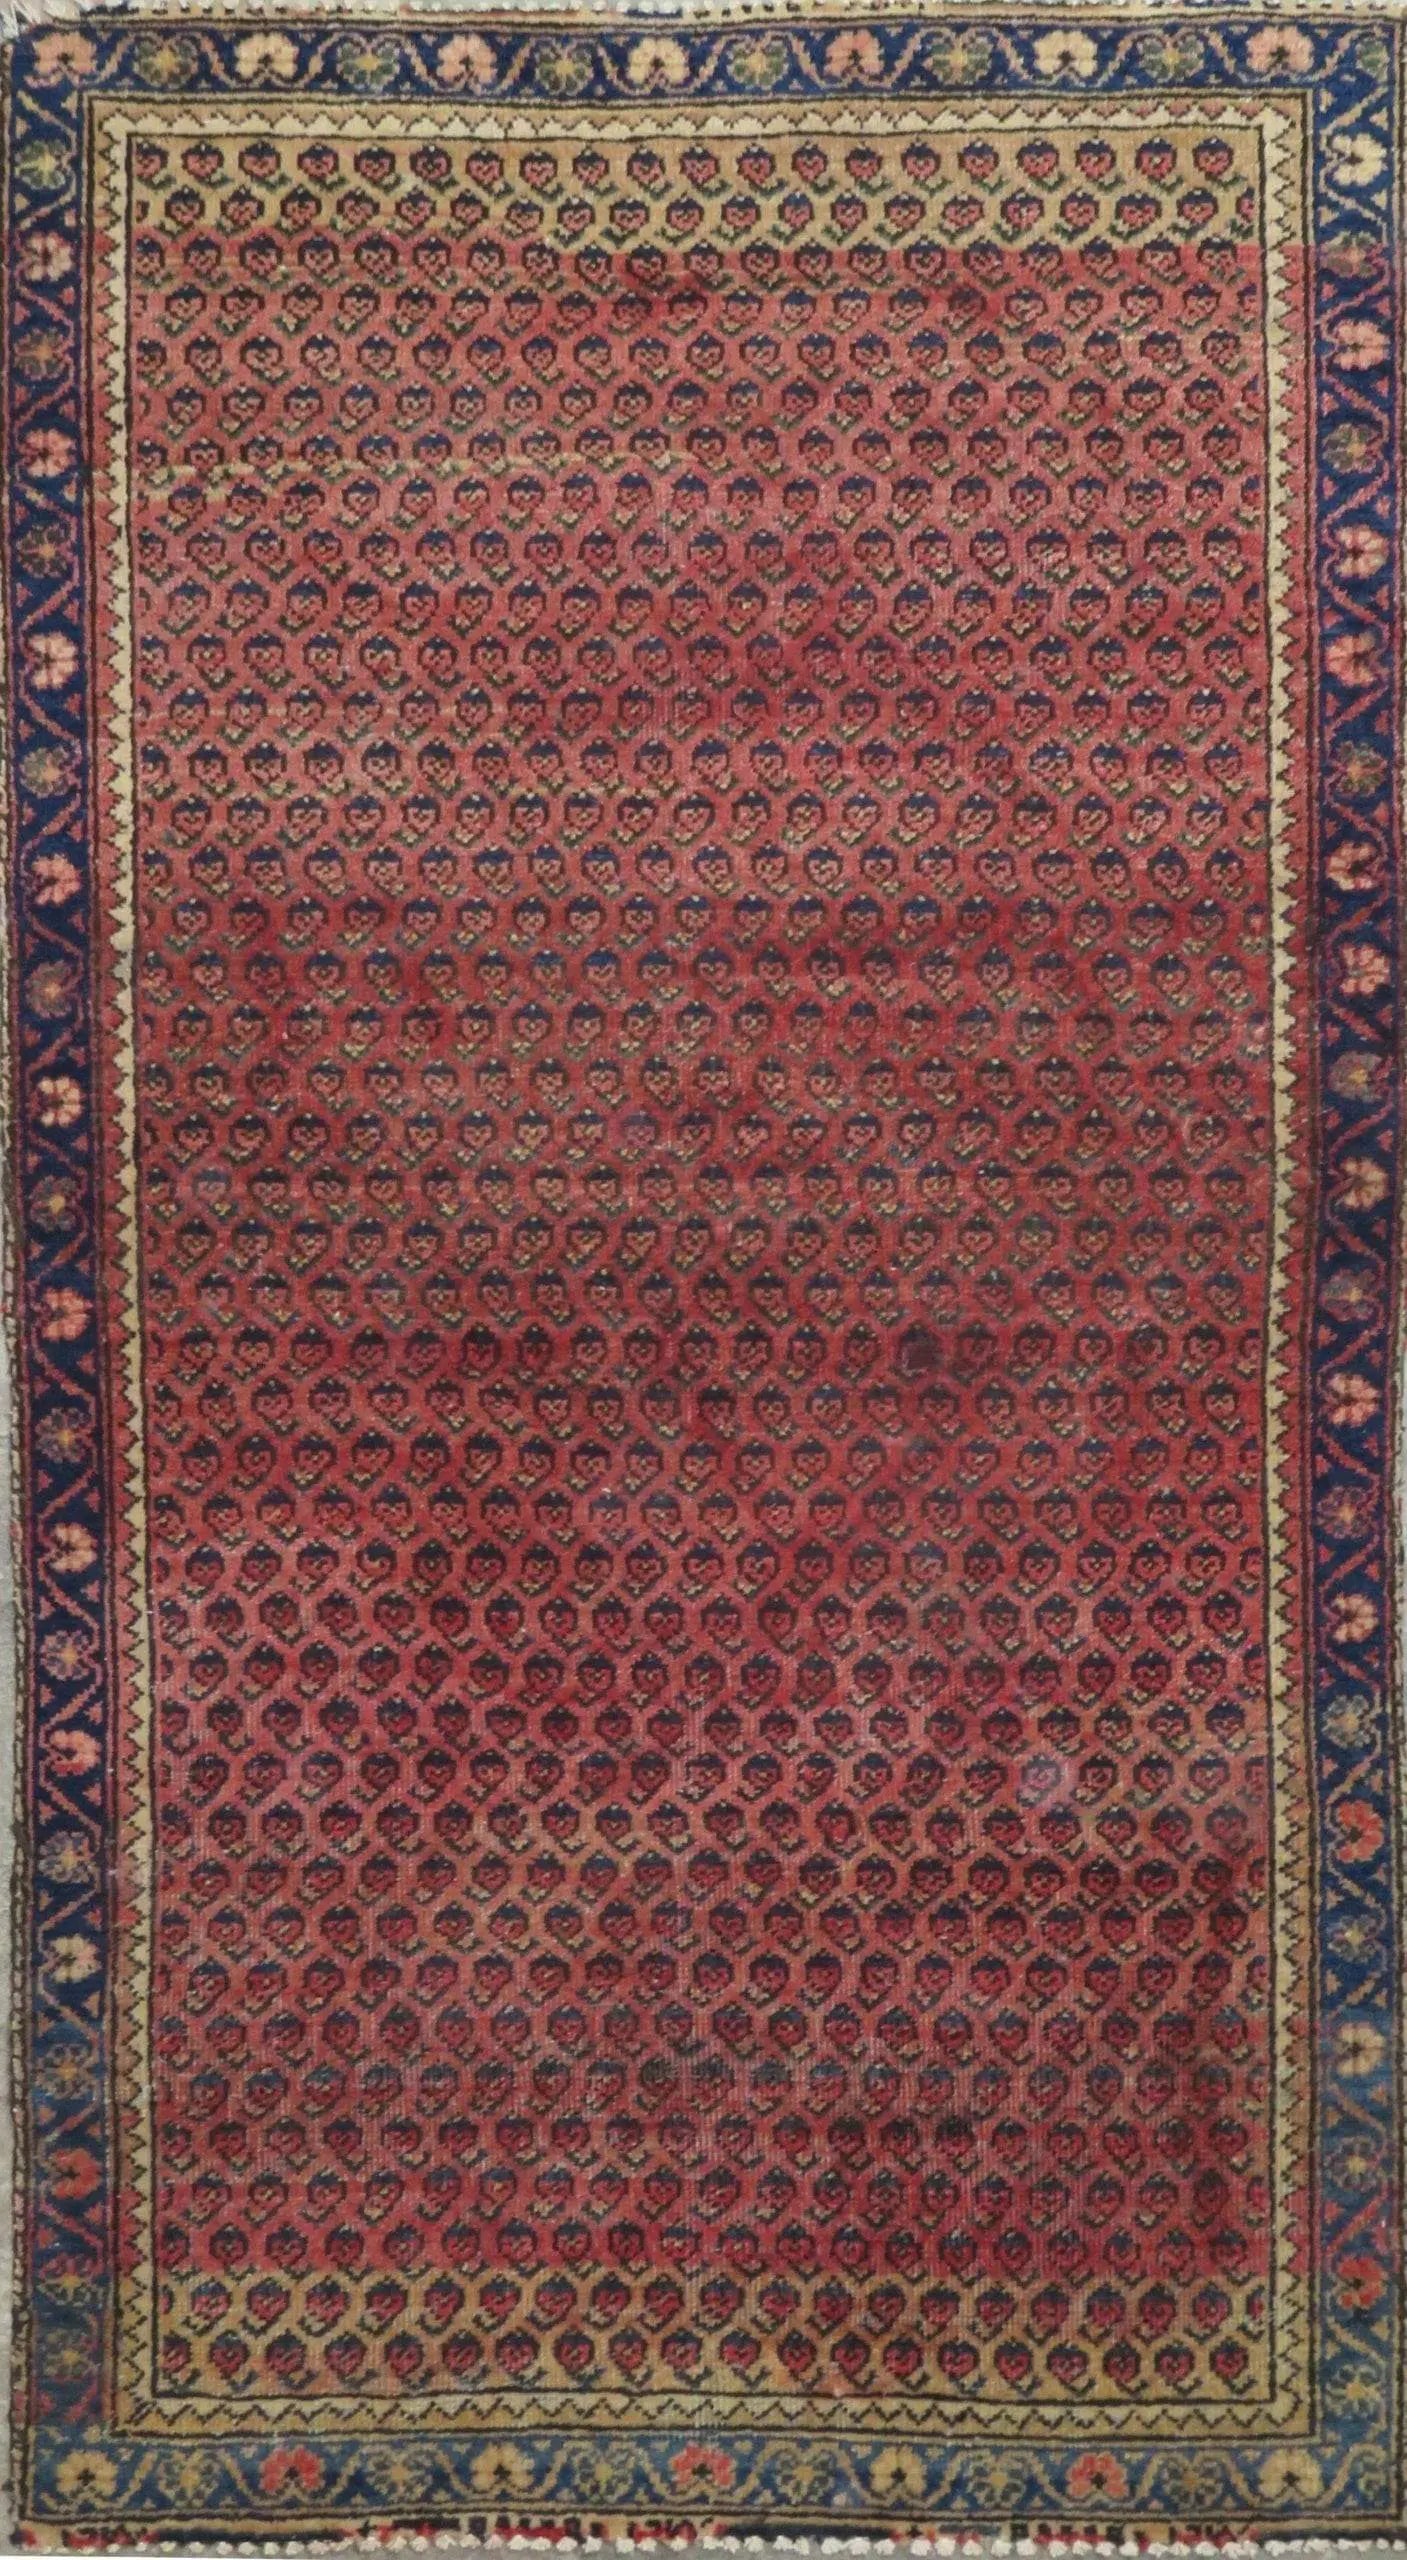 Hand-Knotted Persian Wool Rug _ Luxurious Vintage Design, 5'8" x 3'1", Artisan Crafted